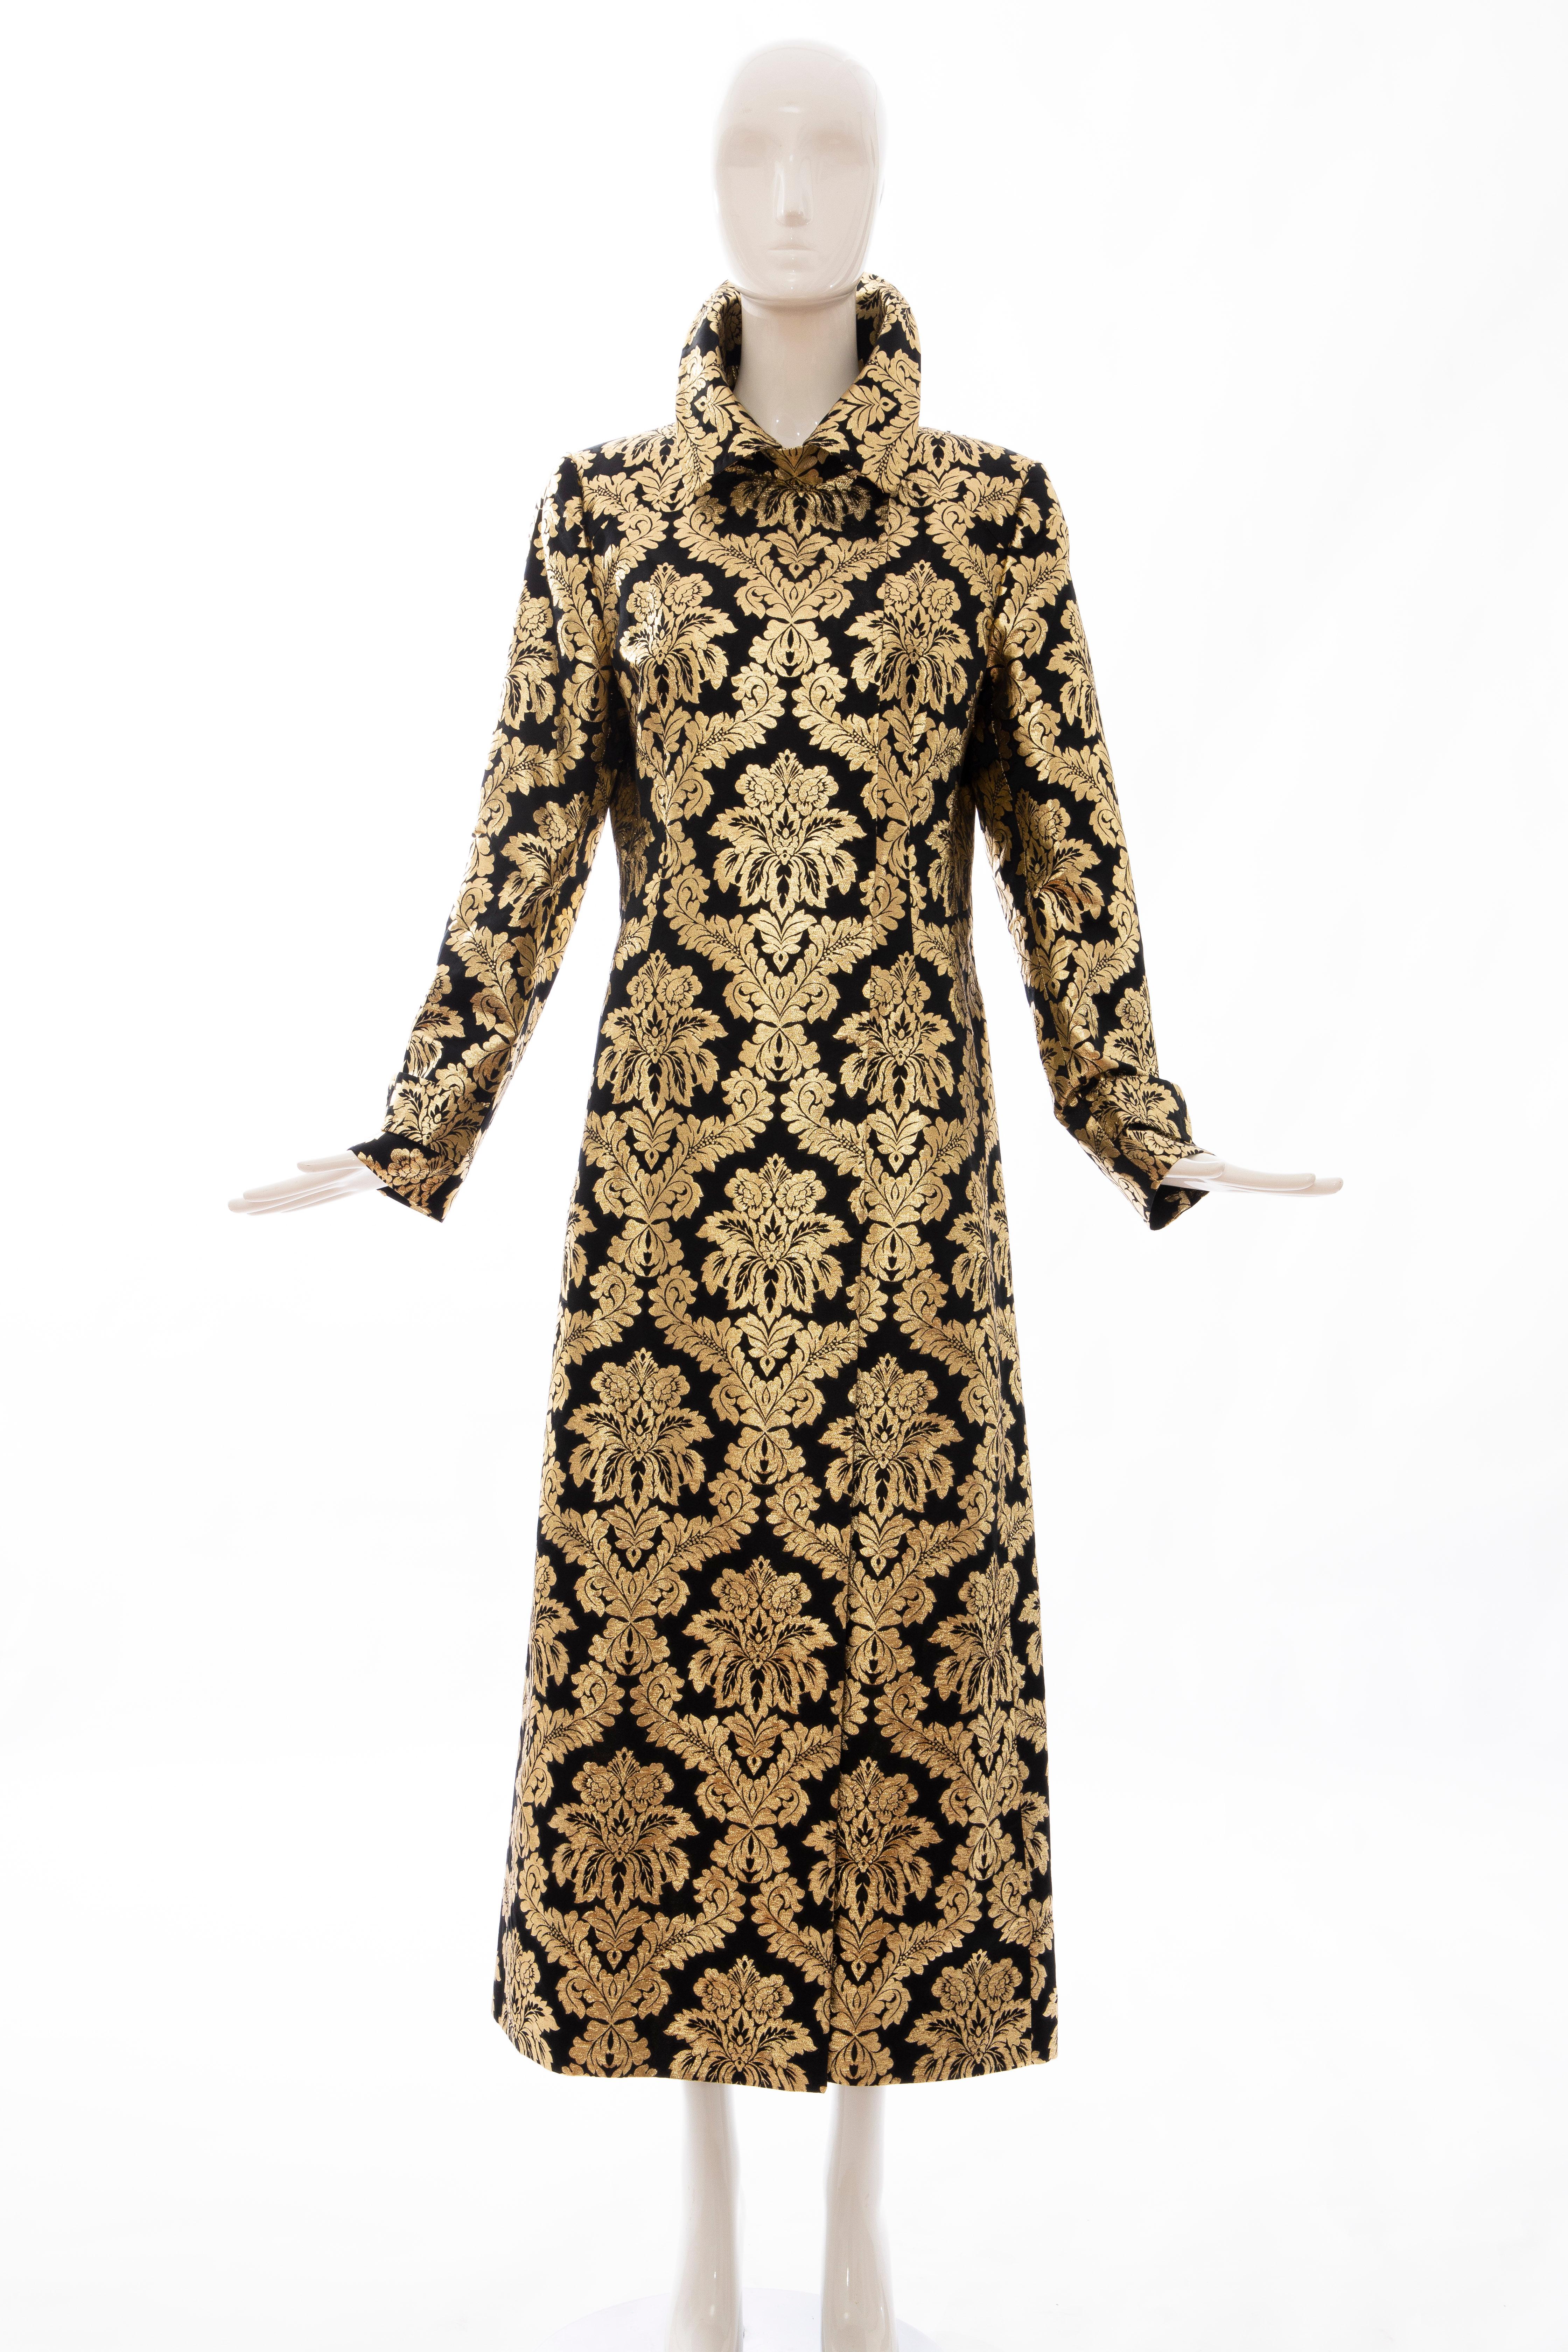 Dolce & Gabbana, Runway Fall 2000, black silk gold floral metallic long brocade evening coat, double front concealed snap fastener closures, back vent and fully lined.

IT.44, US. 8

Bust: 38, Waist: 35, Hip: 42, Shoulder: 15.5, Sleeve: 25.5,